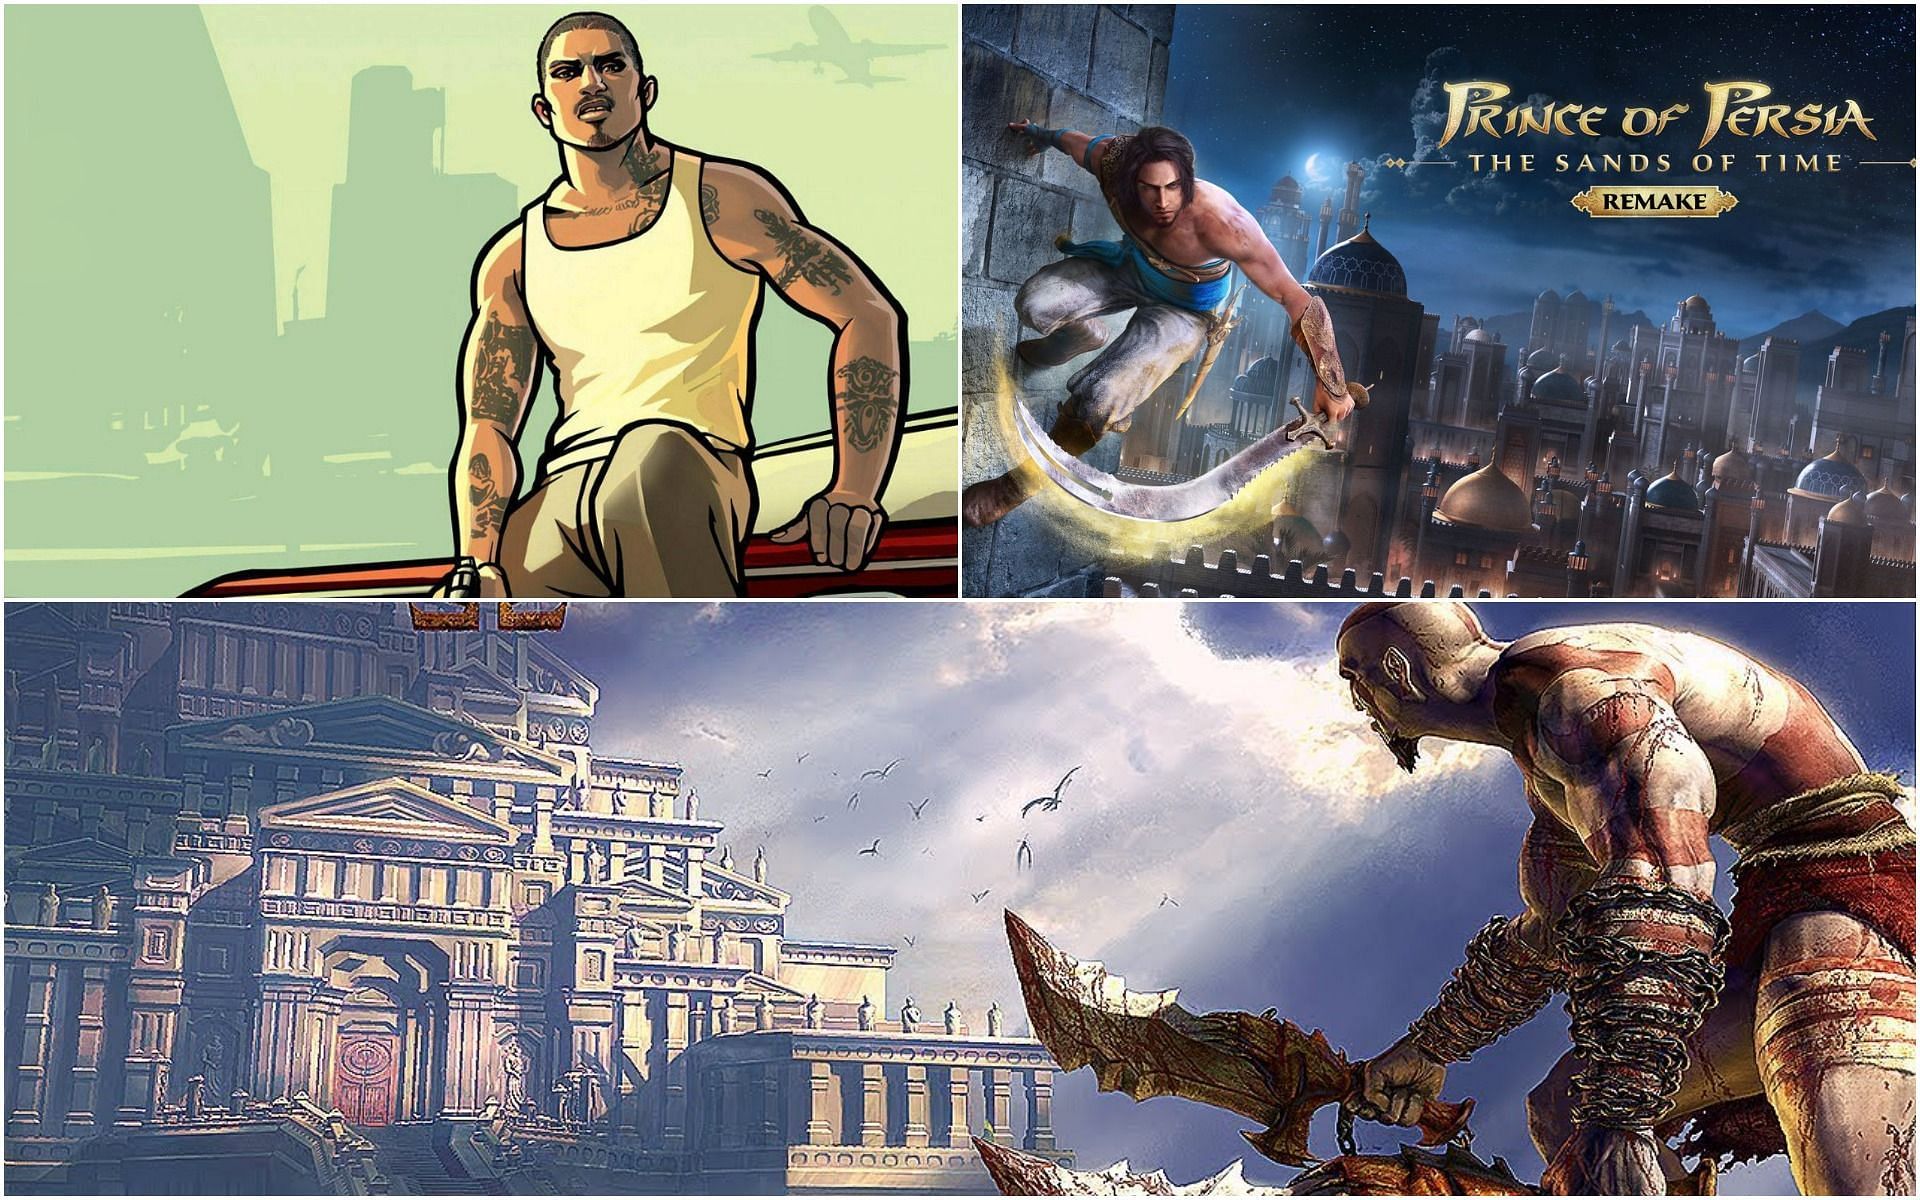 Some of the most iconic games of the Playstation 2 (Images via Rockstar, Ubisoft, and Sony)